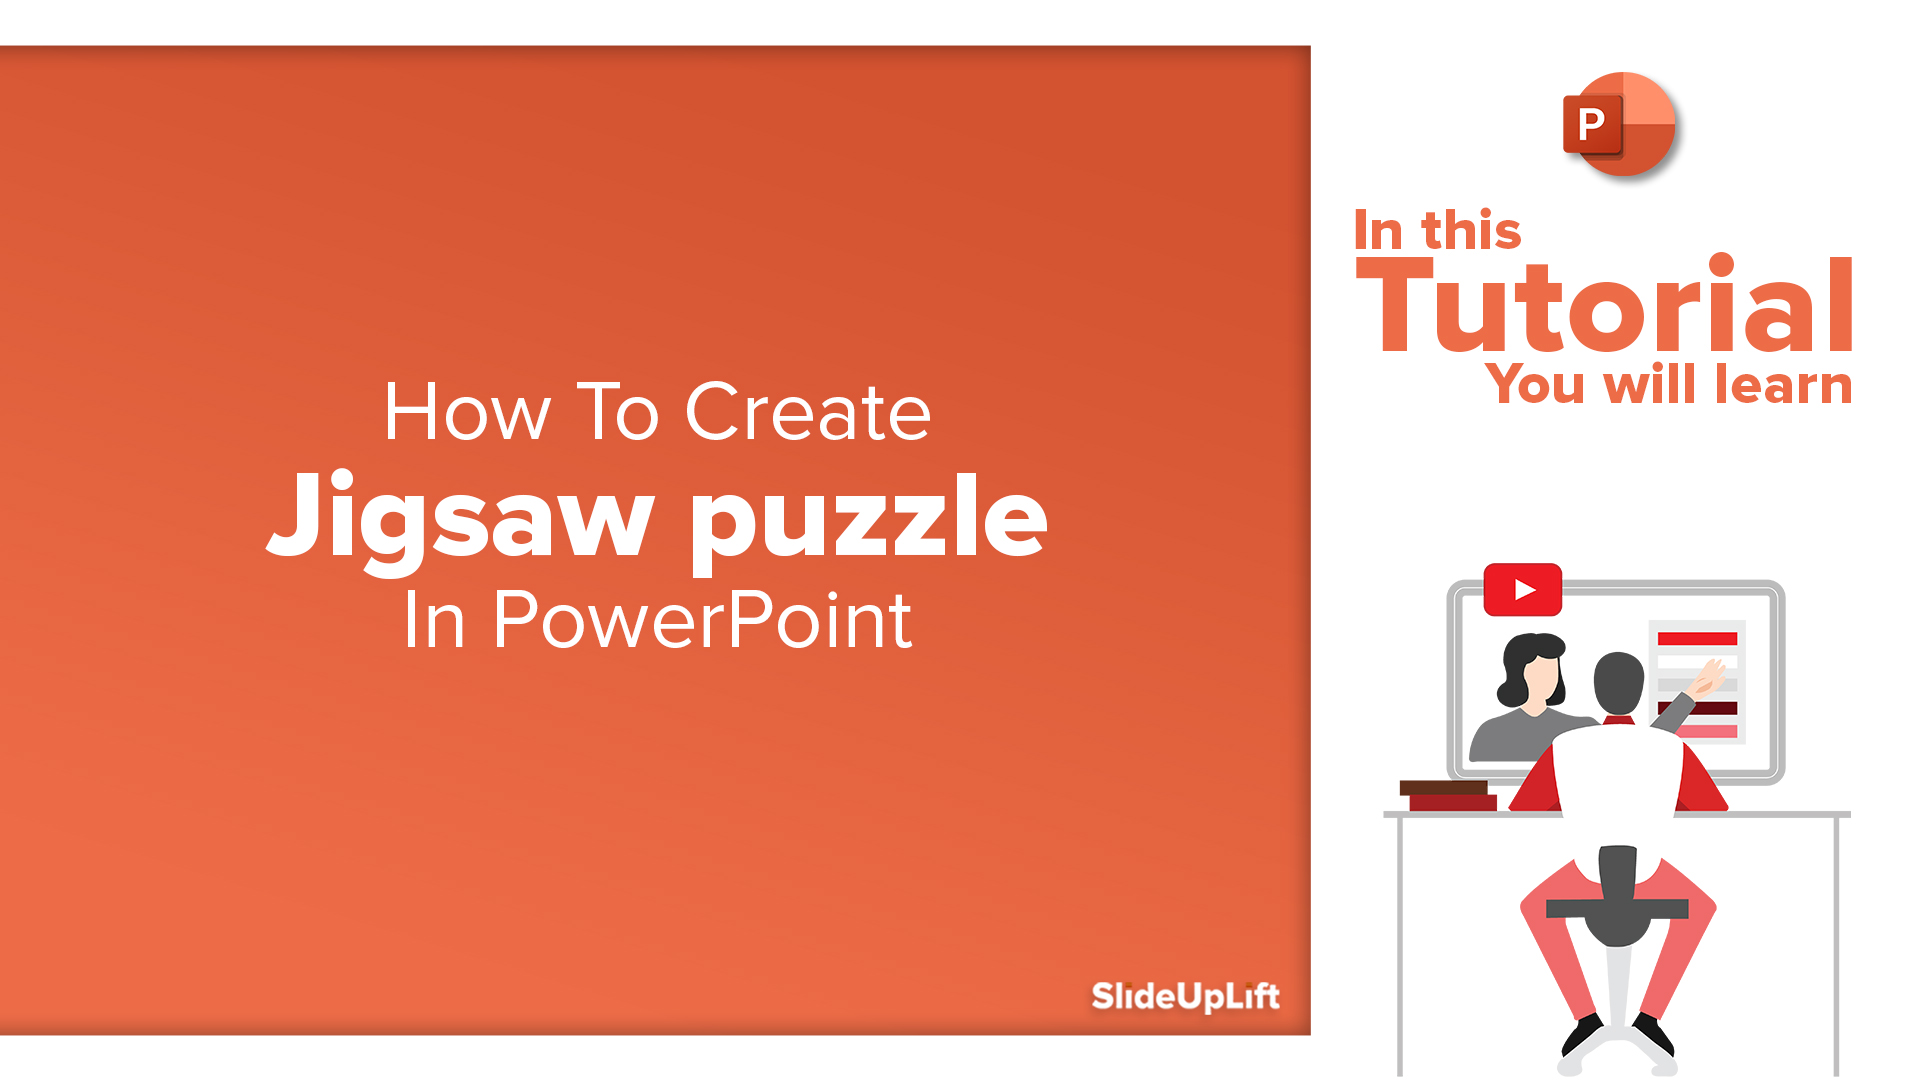 How To Make Jigsaw Puzzle In PowerPoint PowerPoint Tutorial